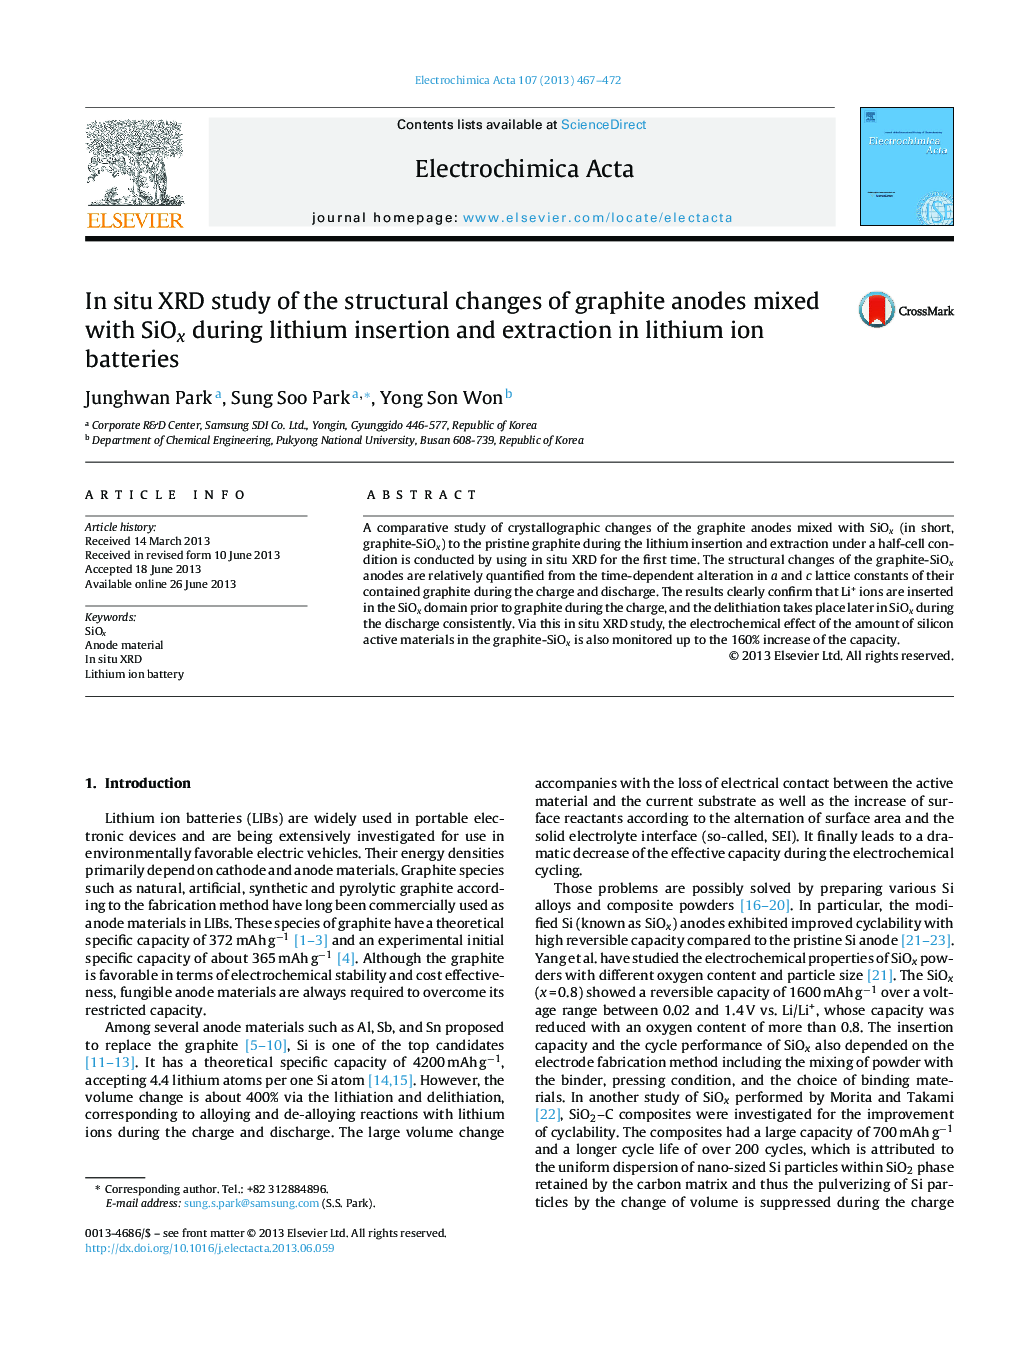 In situ XRD study of the structural changes of graphite anodes mixed with SiOx during lithium insertion and extraction in lithium ion batteries